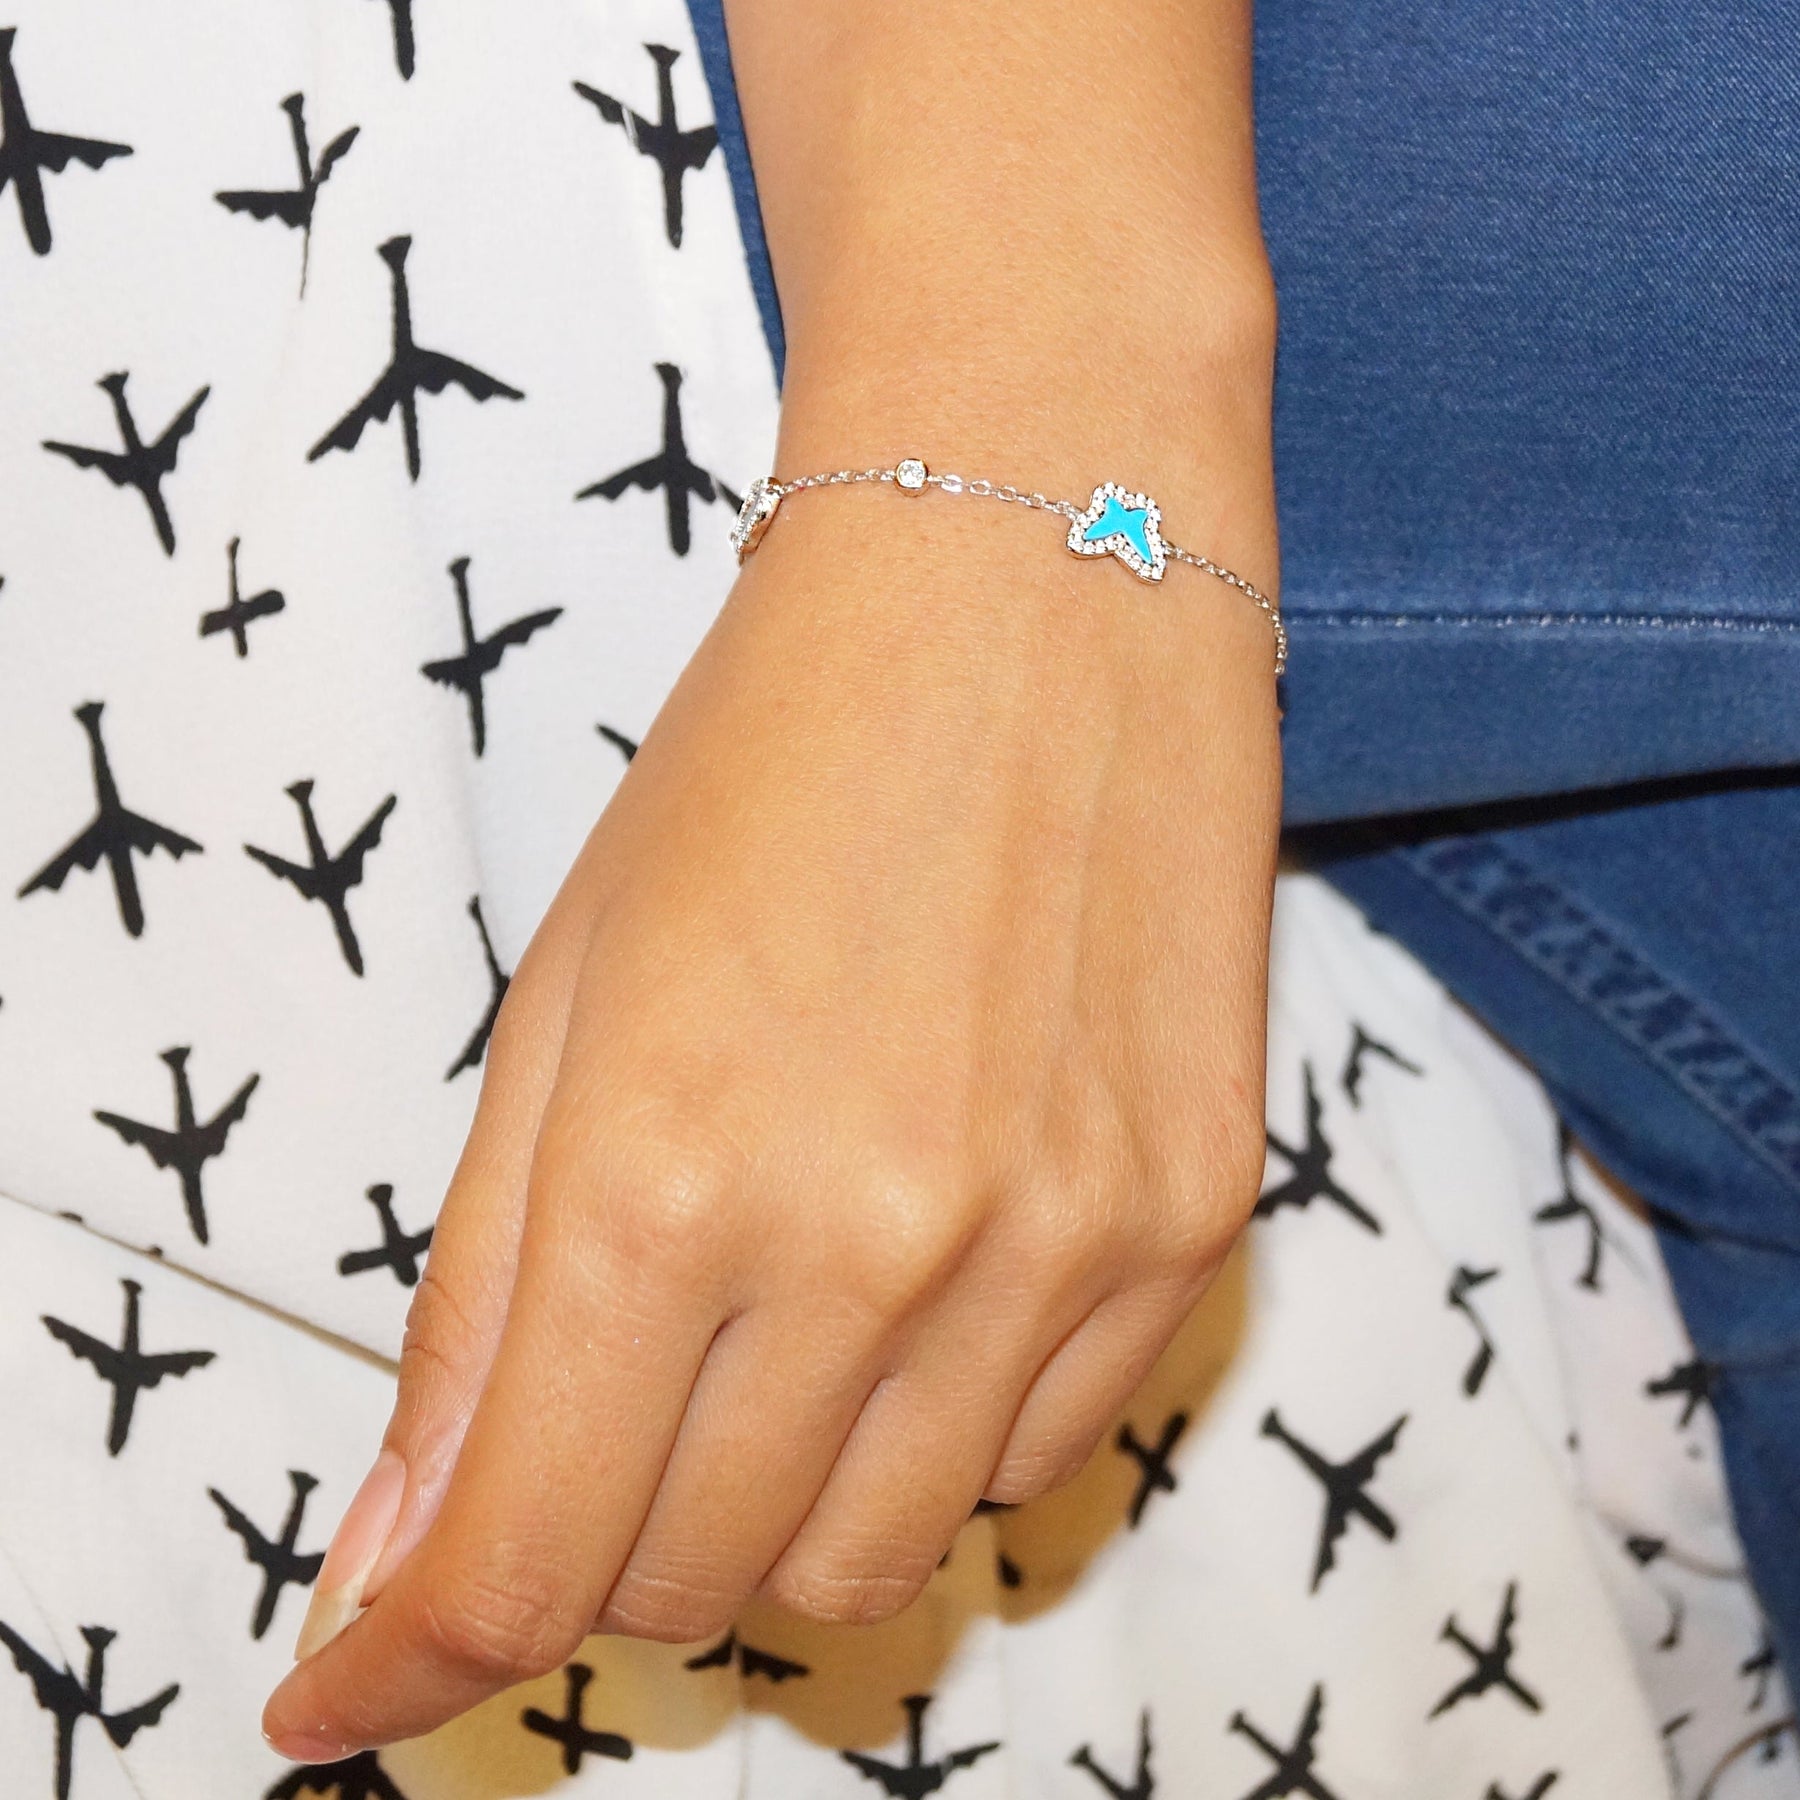 The Butterfly, Hamsa and Fish Bracelet